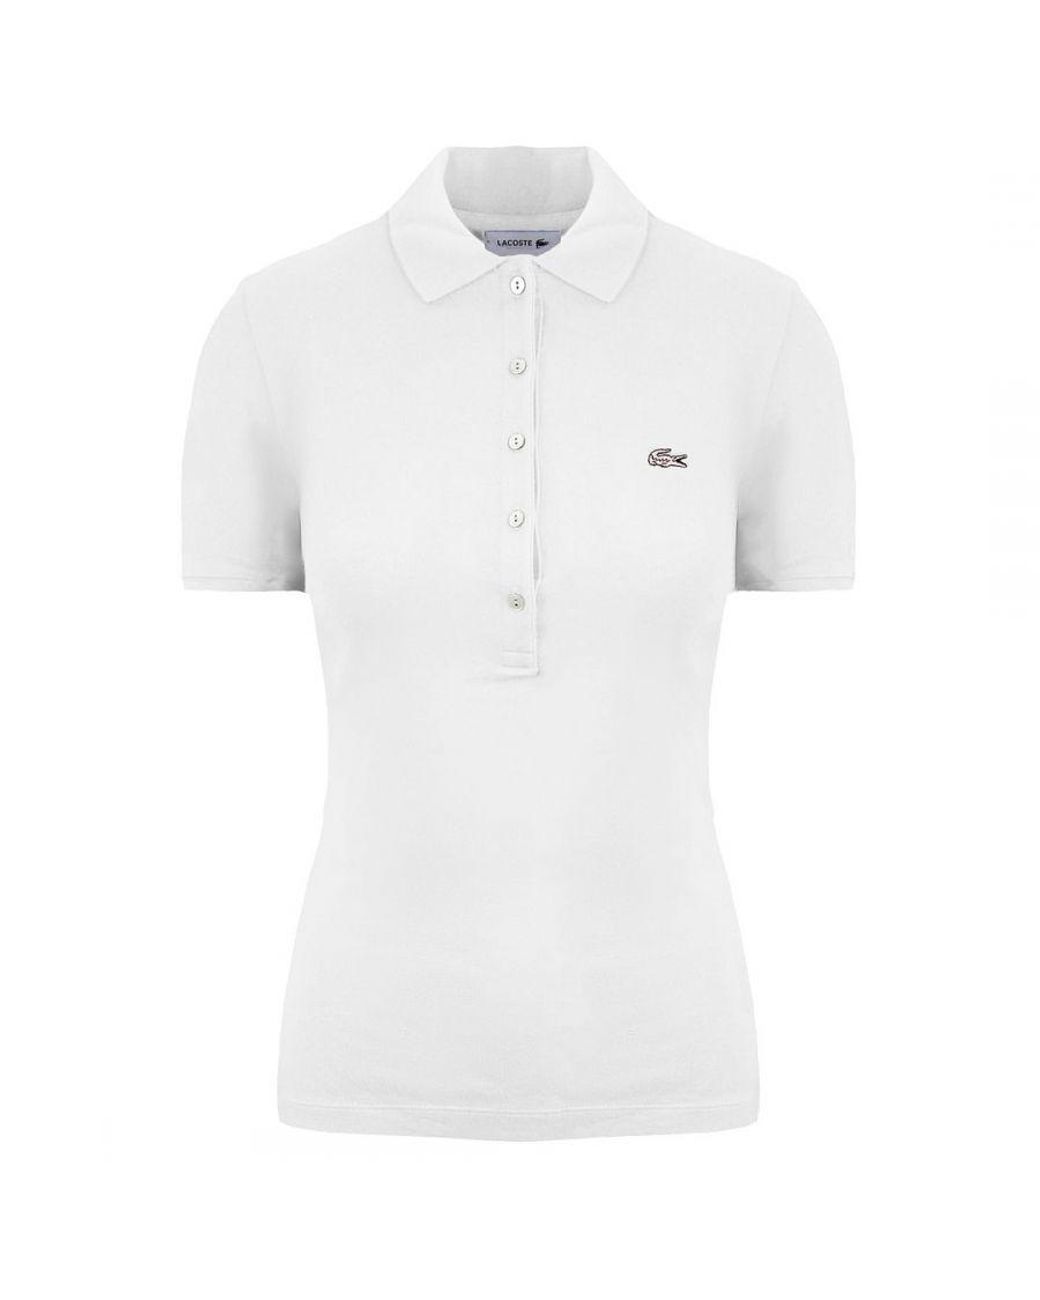 Lacoste Slim Fit Short Sleeve Collared White Polo Shirt Pf7845_001 ...